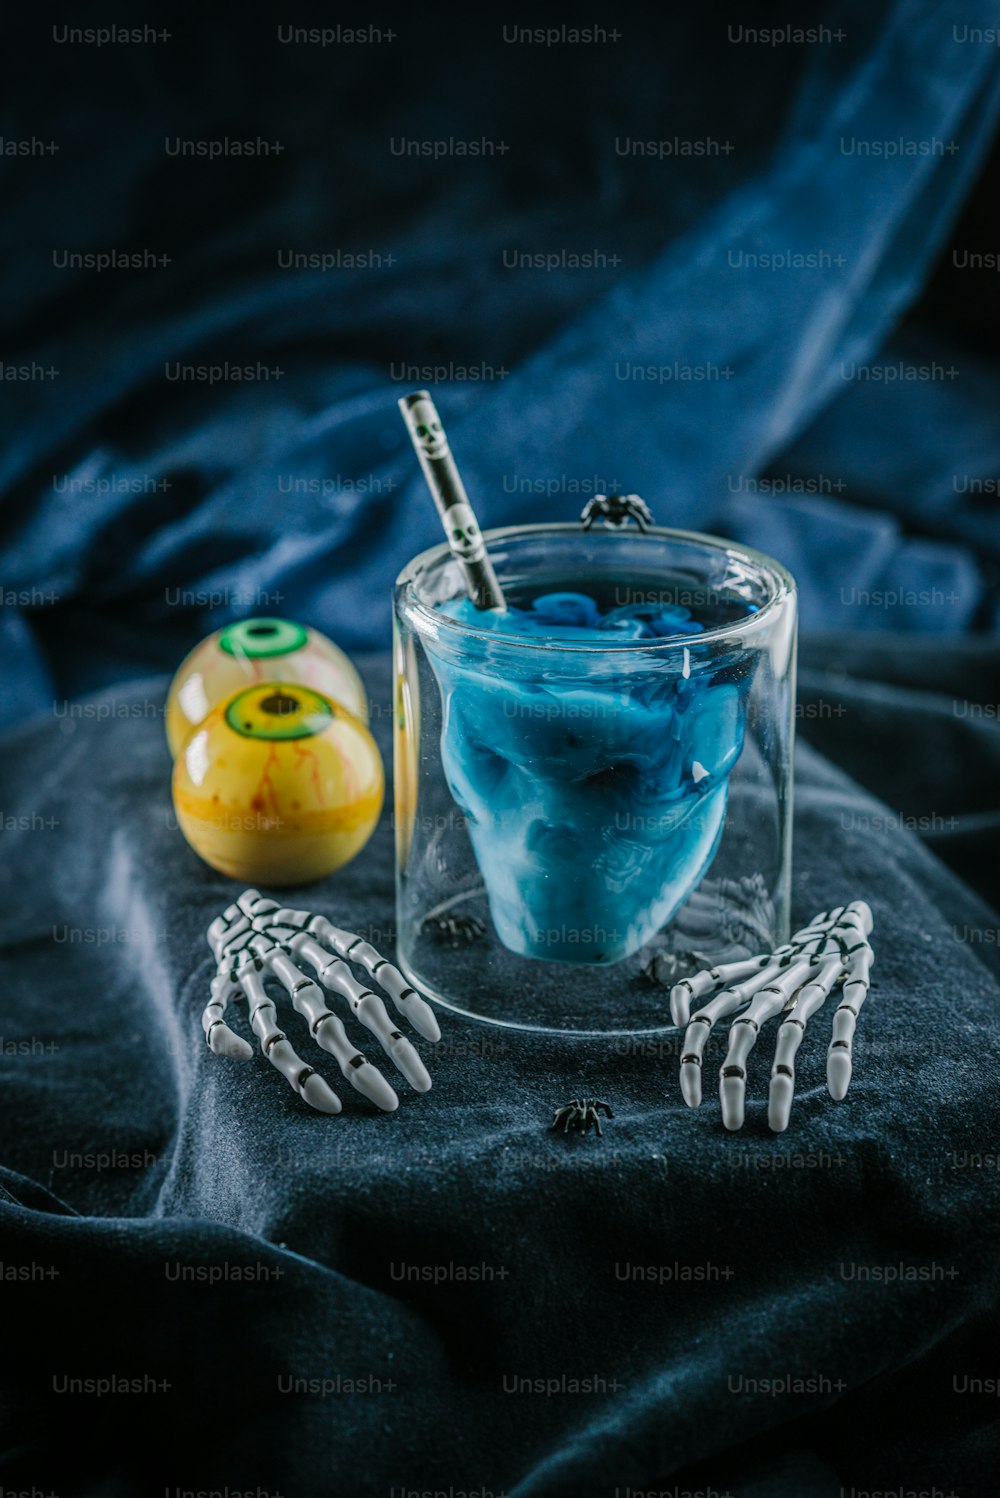 a skeleton hand holding a toothbrush next to a glass of blue liquid